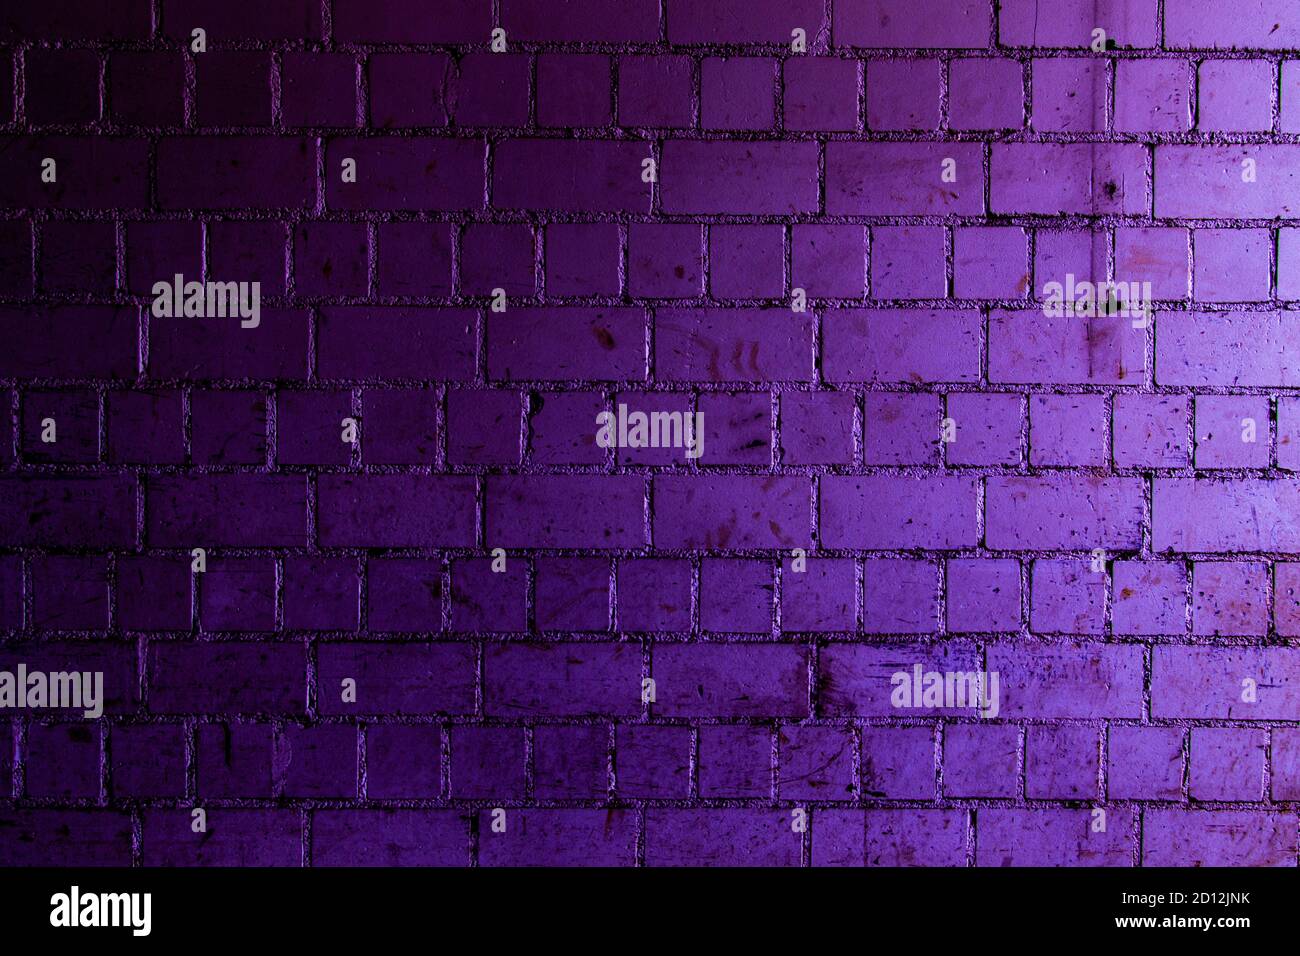 Purple brick wall background with shades of light and dark purple Stock Photo